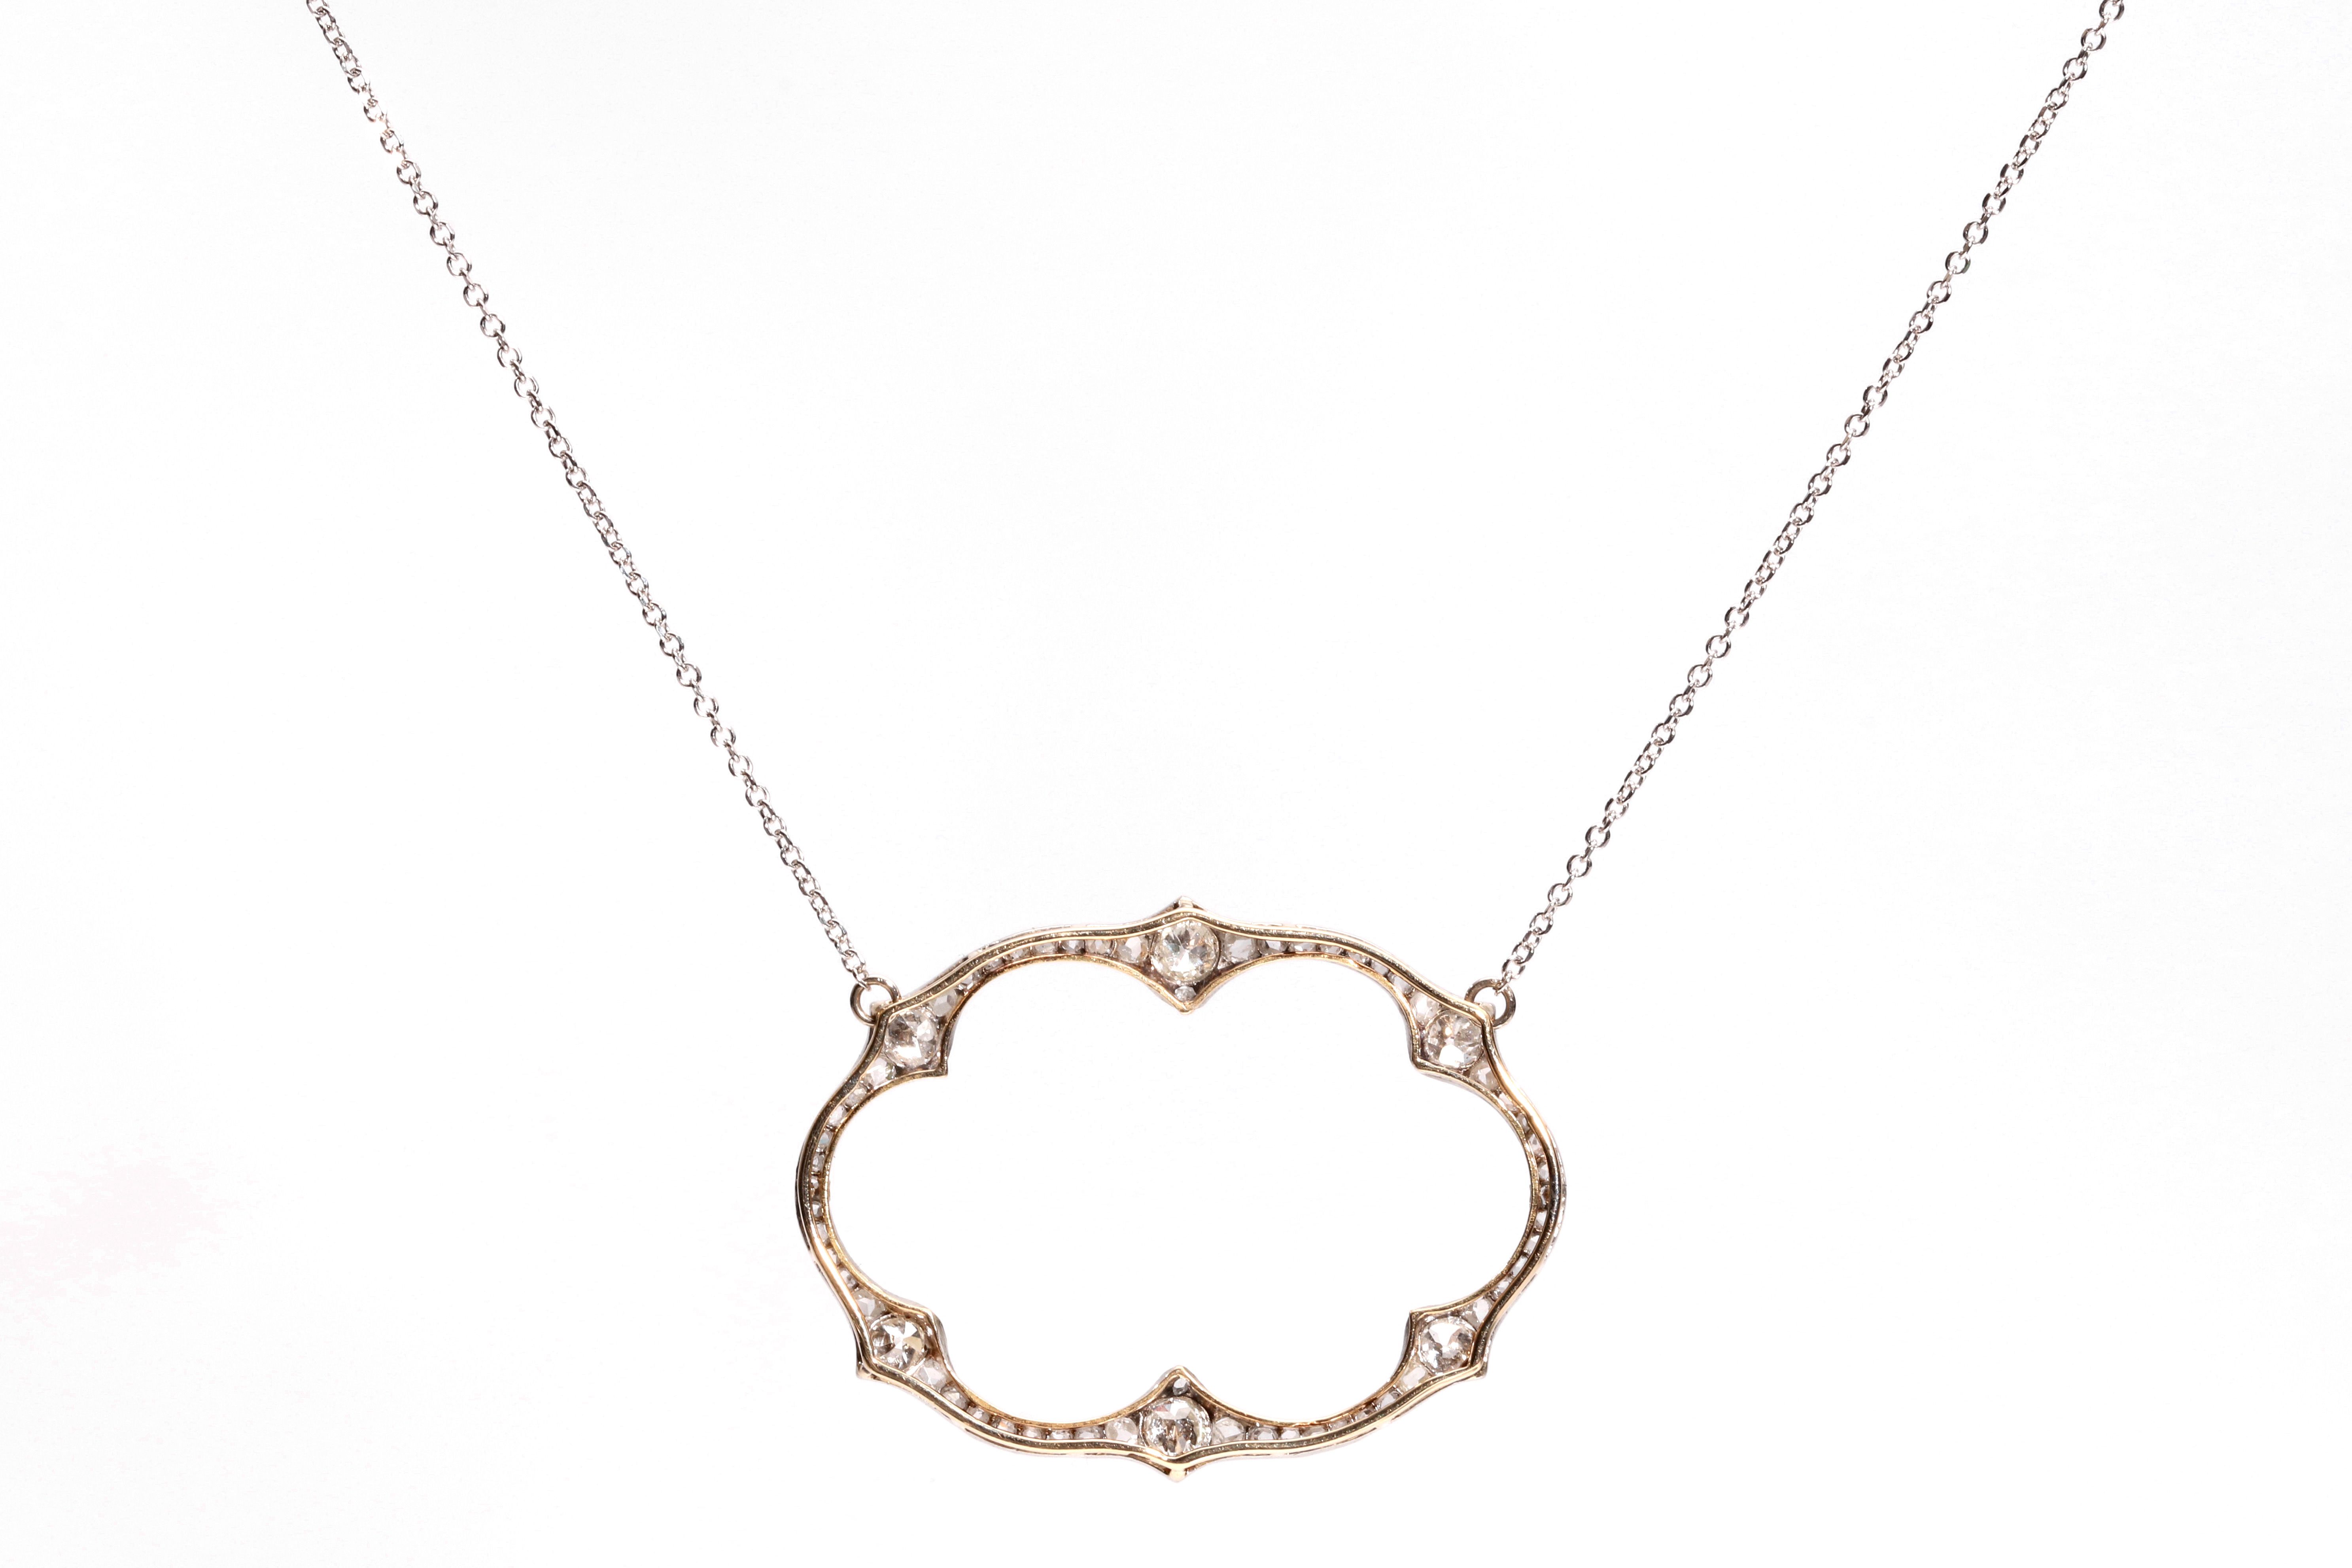 A diamond pendant necklace The openwork oval pendant set with brilliant and rose-cut diamonds, - Image 3 of 4